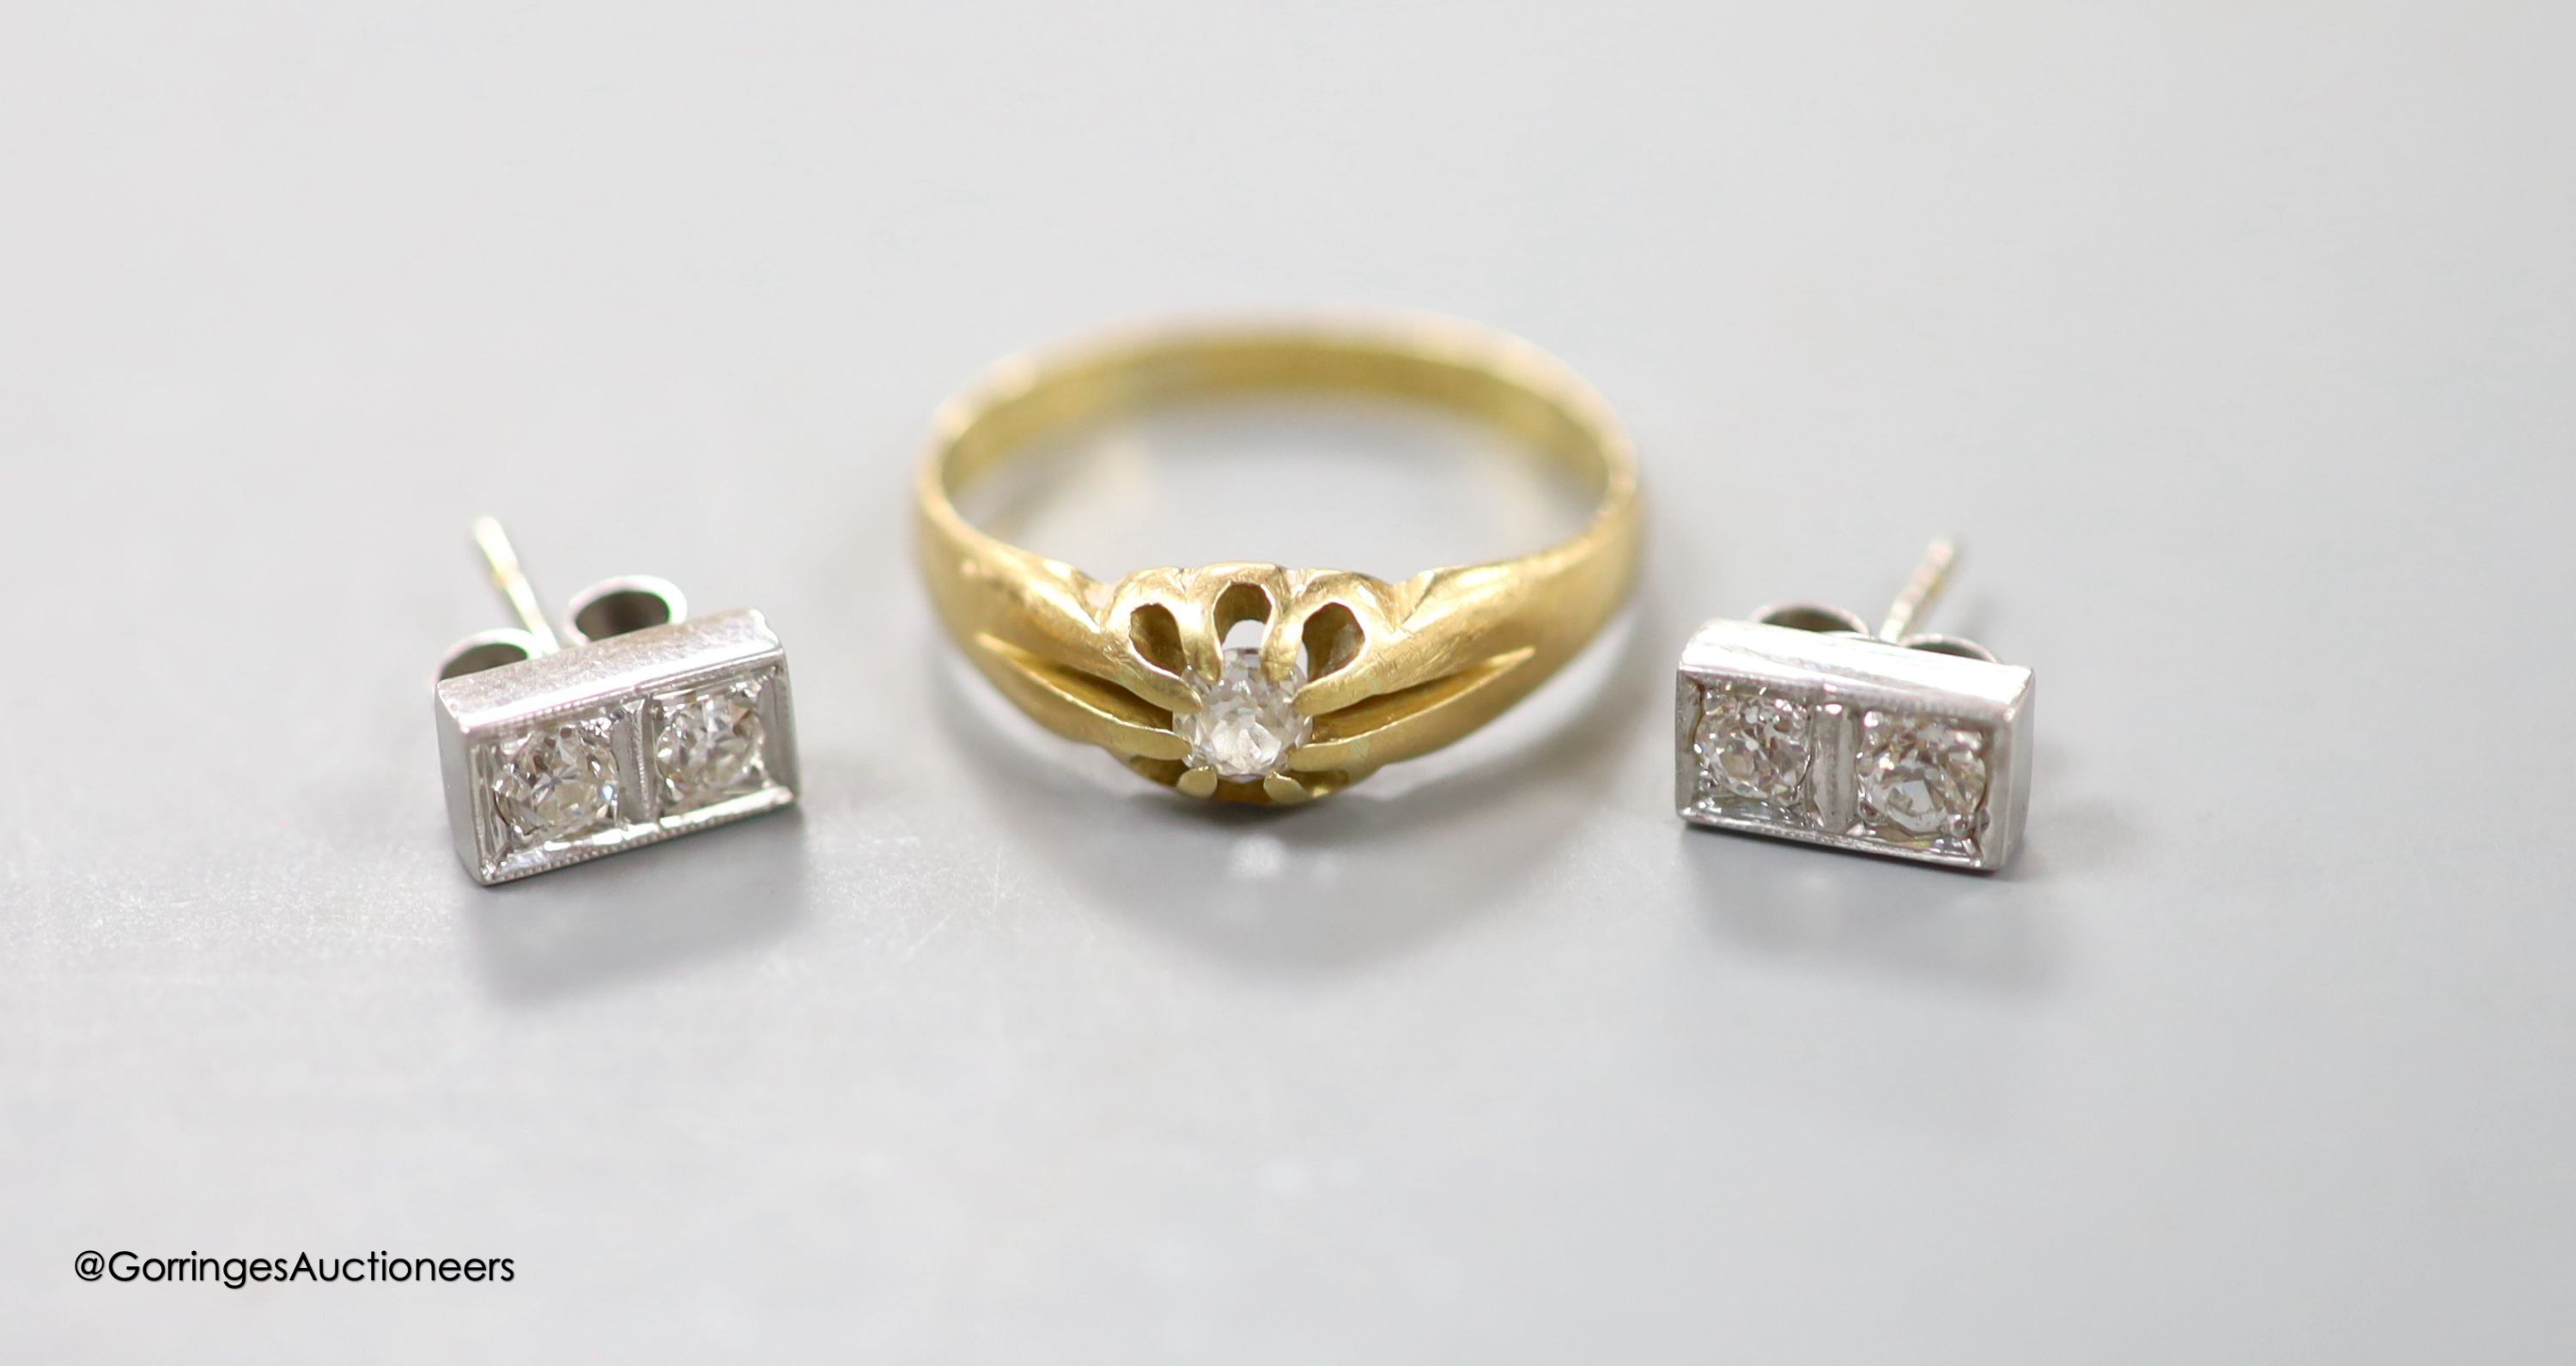 A pair of diamond and 18ct white gold earrings and a diamond solitaire ring, 18ct gold shank, gross 5.6 grams.